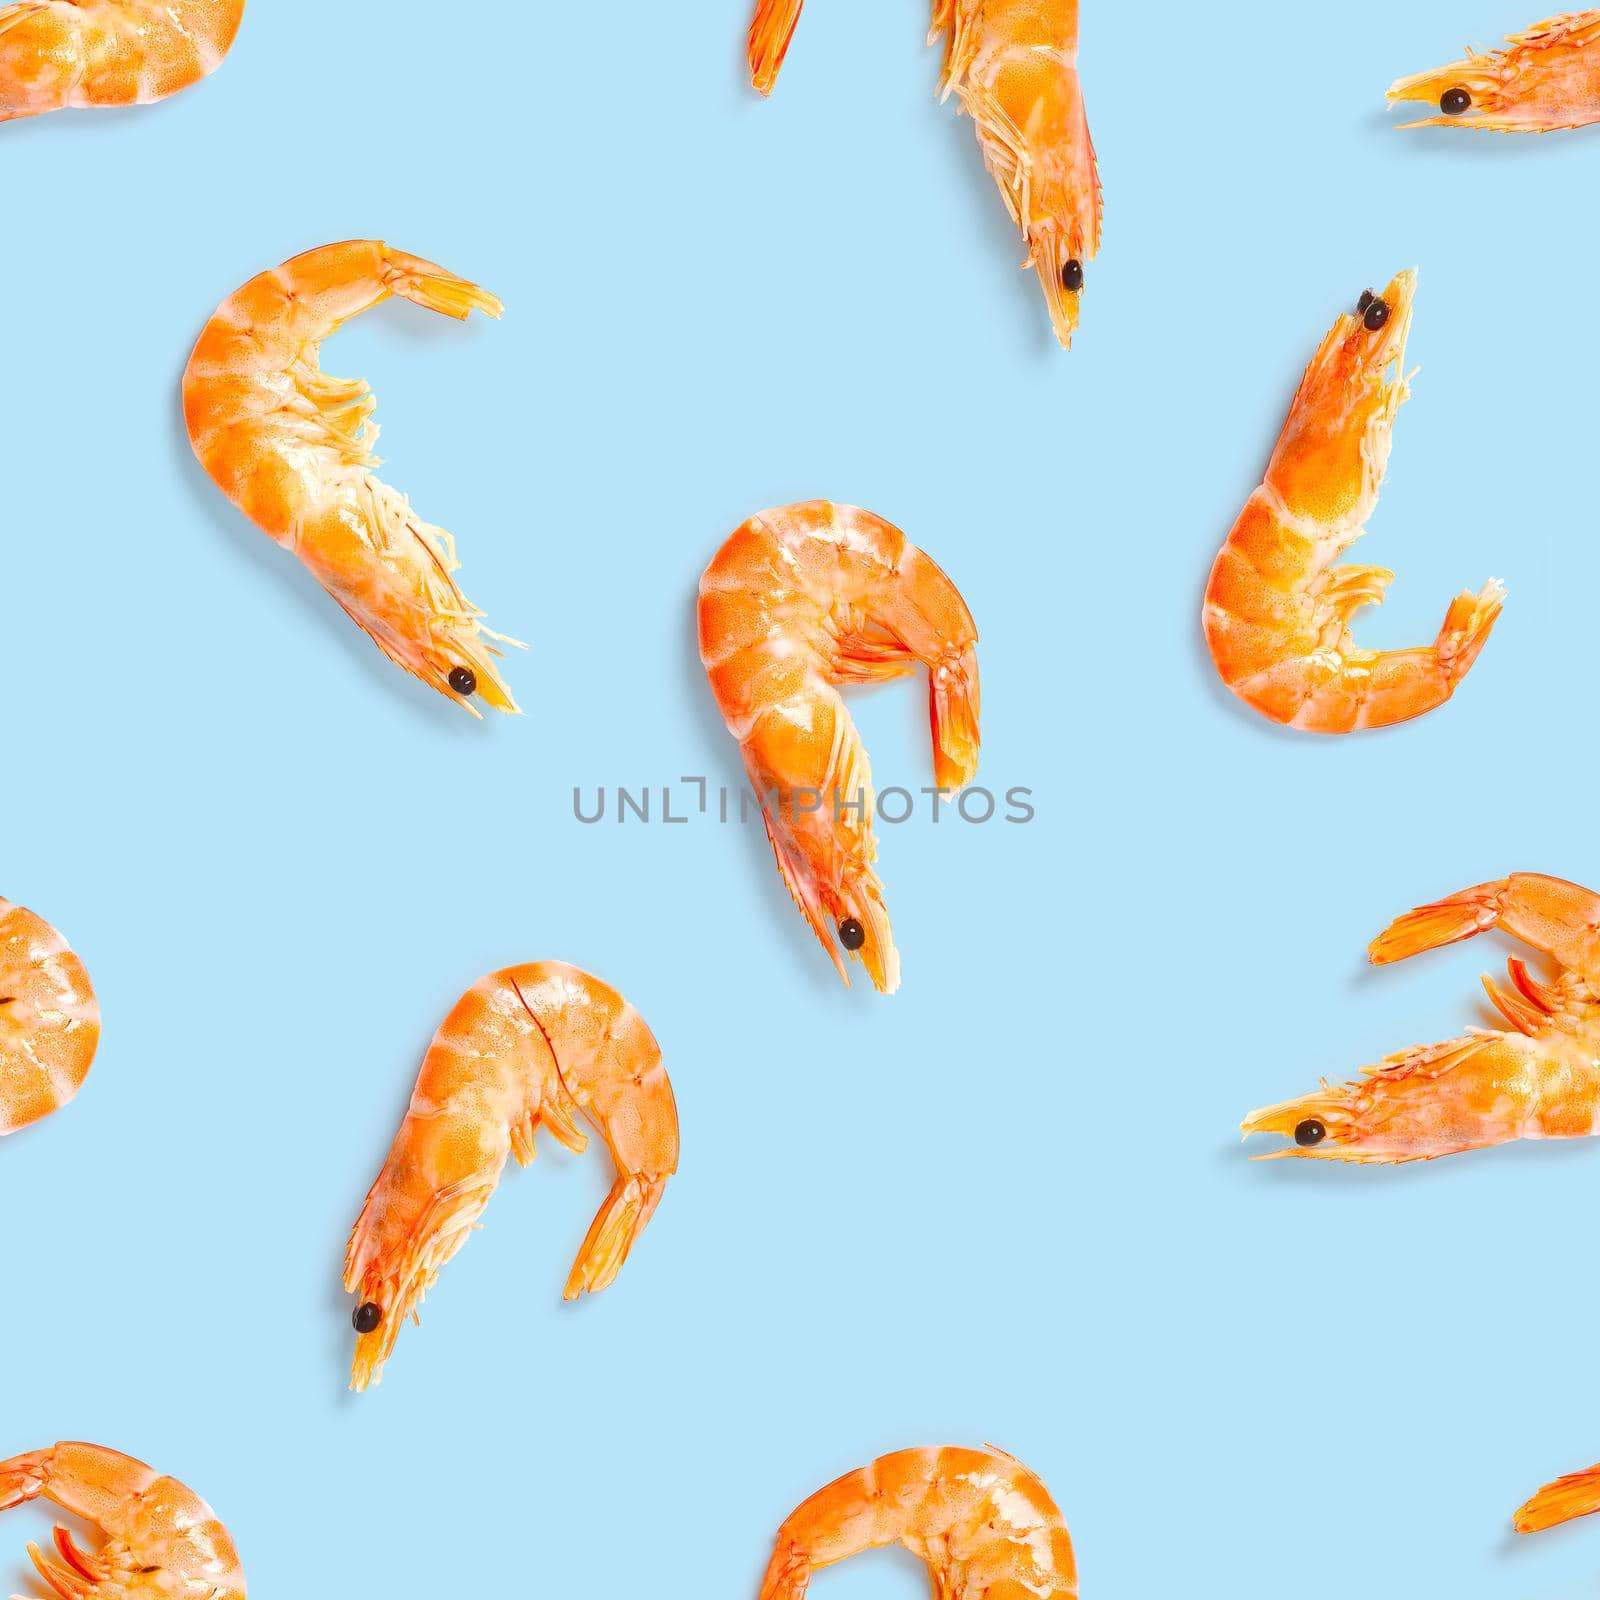 Seamless pattern made from Prawn isolated on a blue background. Tiger shrimp. Seafood seamless pattern with shrimps. seafood pattern